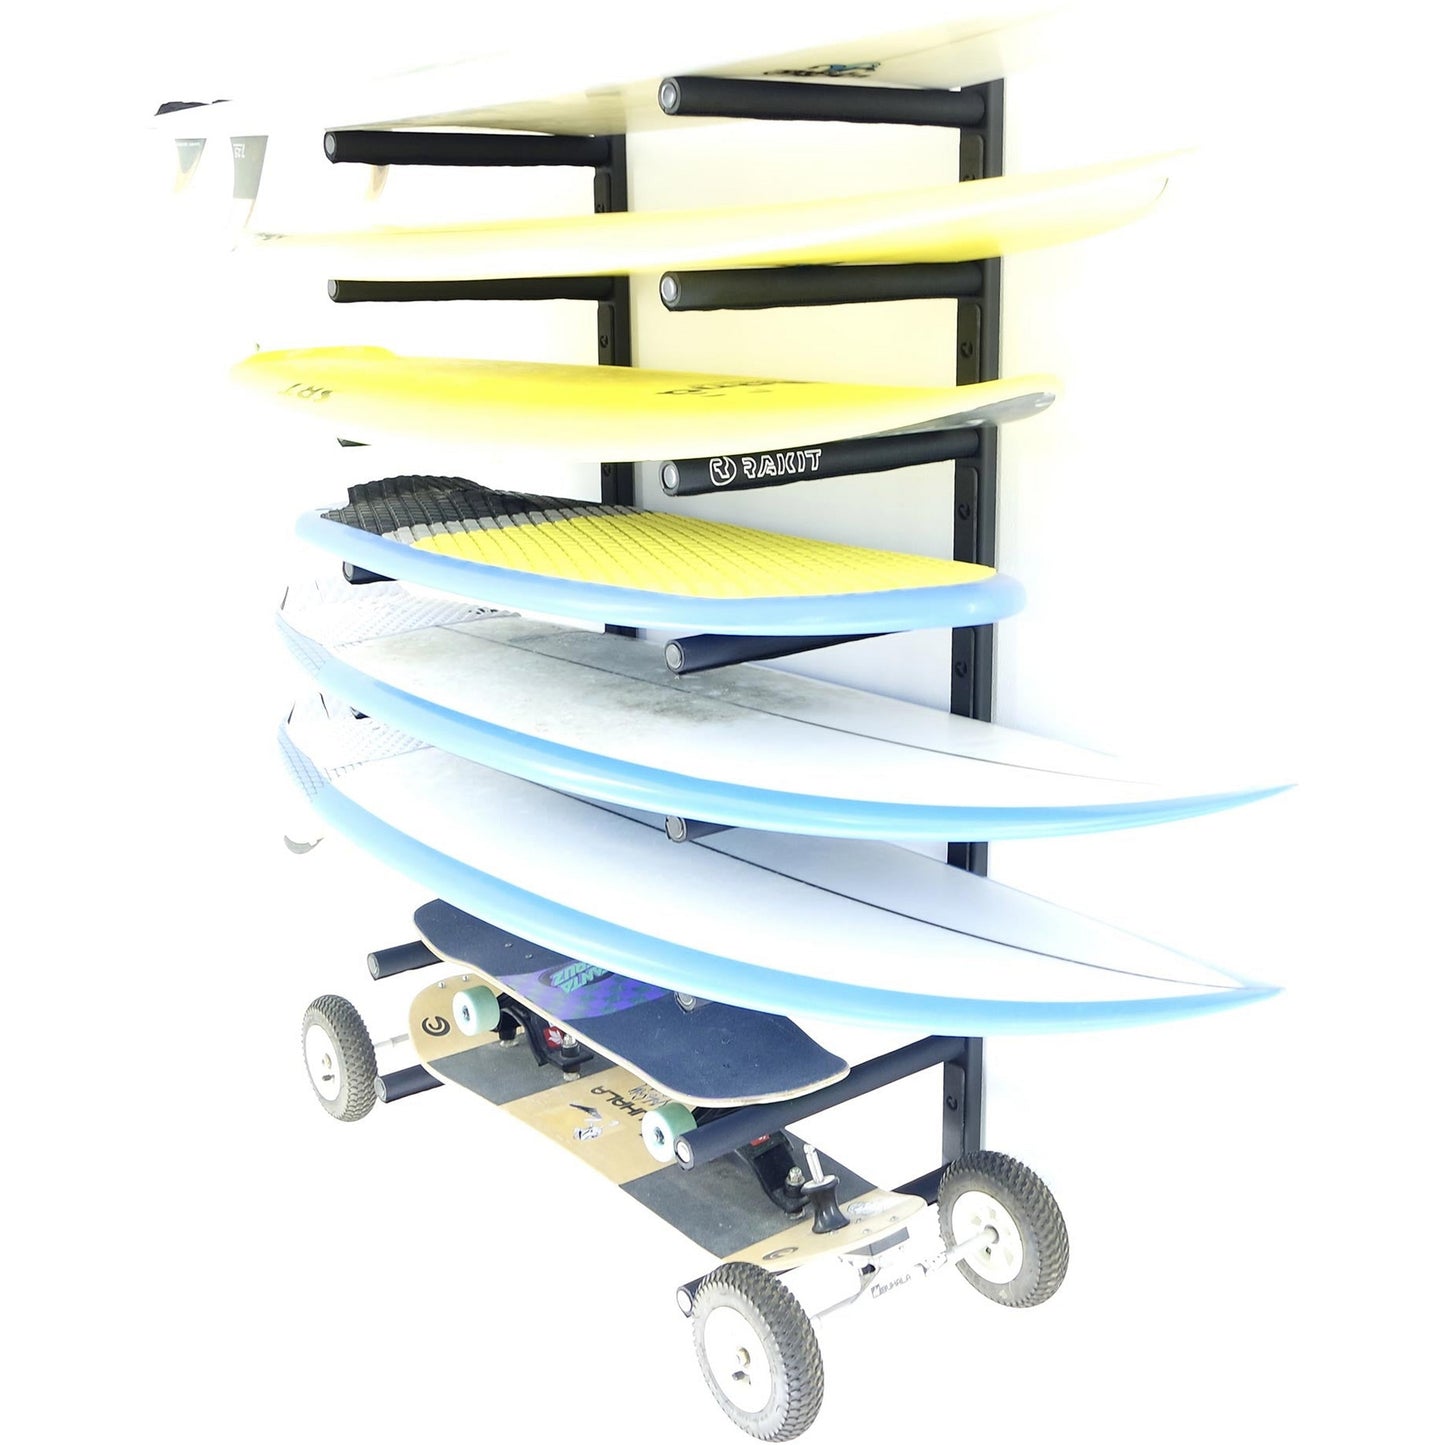 Jacobs Ladder Surf Rack - Rakit Systems SUITABLE FOR A WIDE RANGE OF BOARDS. FROM SURFBOARDS TO SKATEBOARDS OUR BOARD RACKS ENSURE YOUR BOARDS ARE SAFELY AND PROUDLY ON DISPLAY RAKIT CAPE TOWN #WHEREBOARDSSLEEP